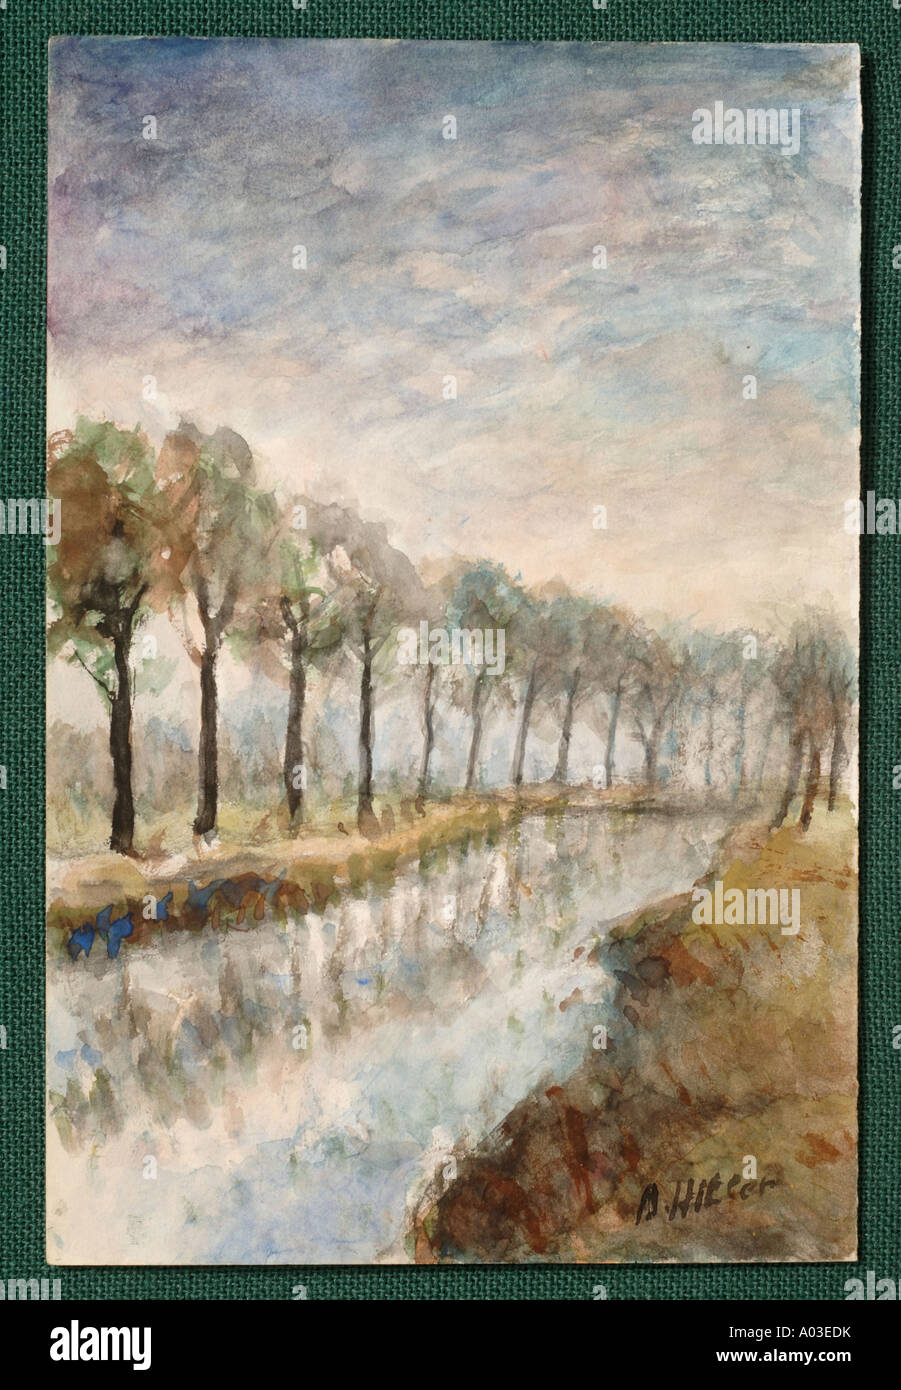 THE SAMBRE CANAL FROM THE BRIDGE AT OSS PART OF A COLLECTION OF OIL PAINTINGS 1914 1918 PURPORTED TO BE BY ADOLF HITLER Stock Photo